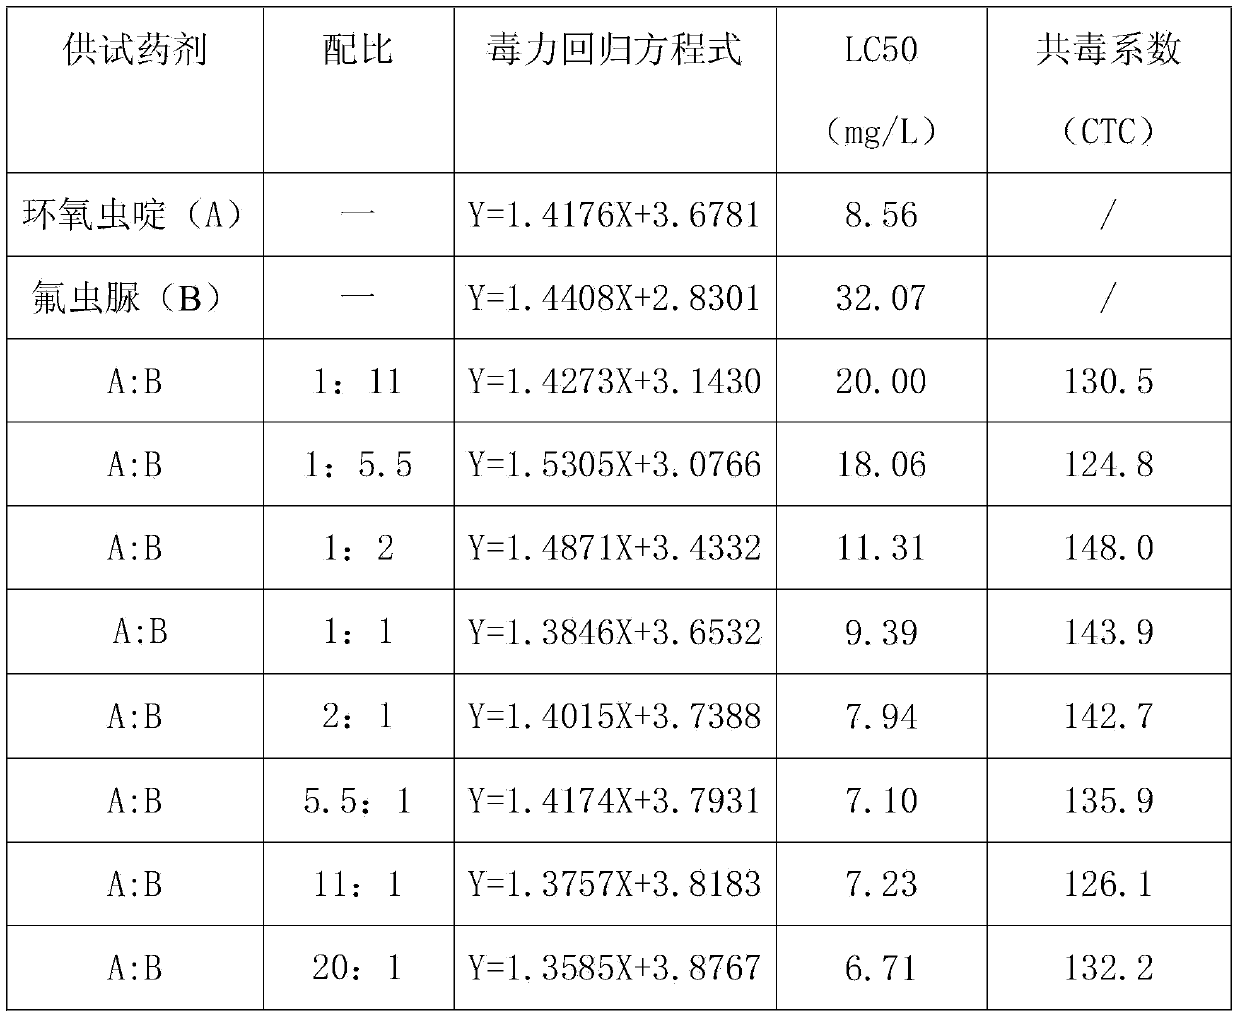 Ultra-low volume liquid containing cycloxaprid and insect growth regulator pesticide